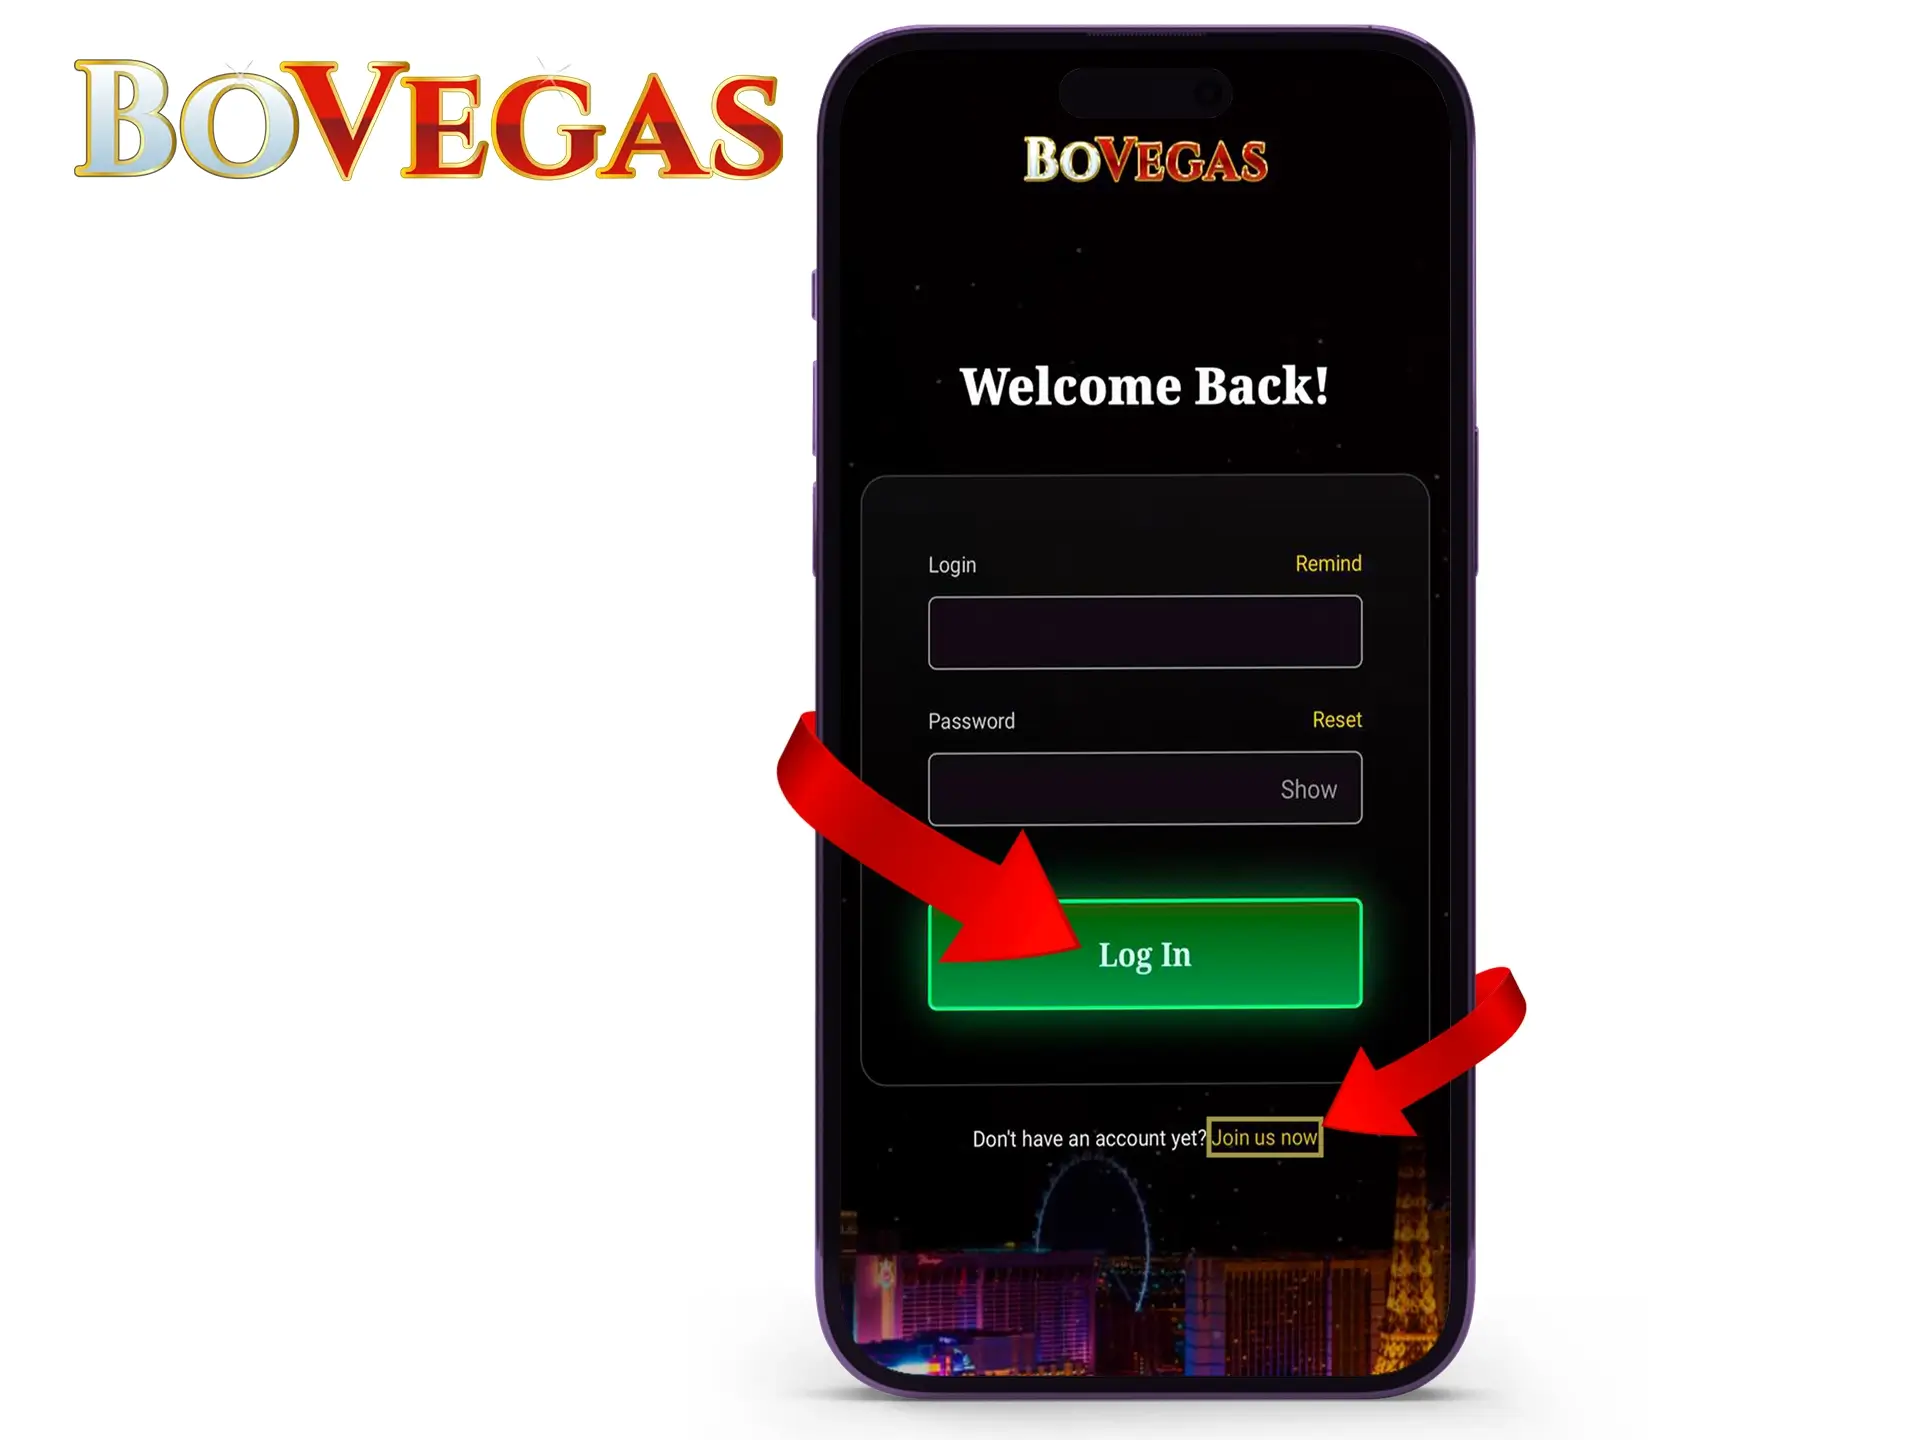 Register or log in to BoVegas to access the iOS web version.